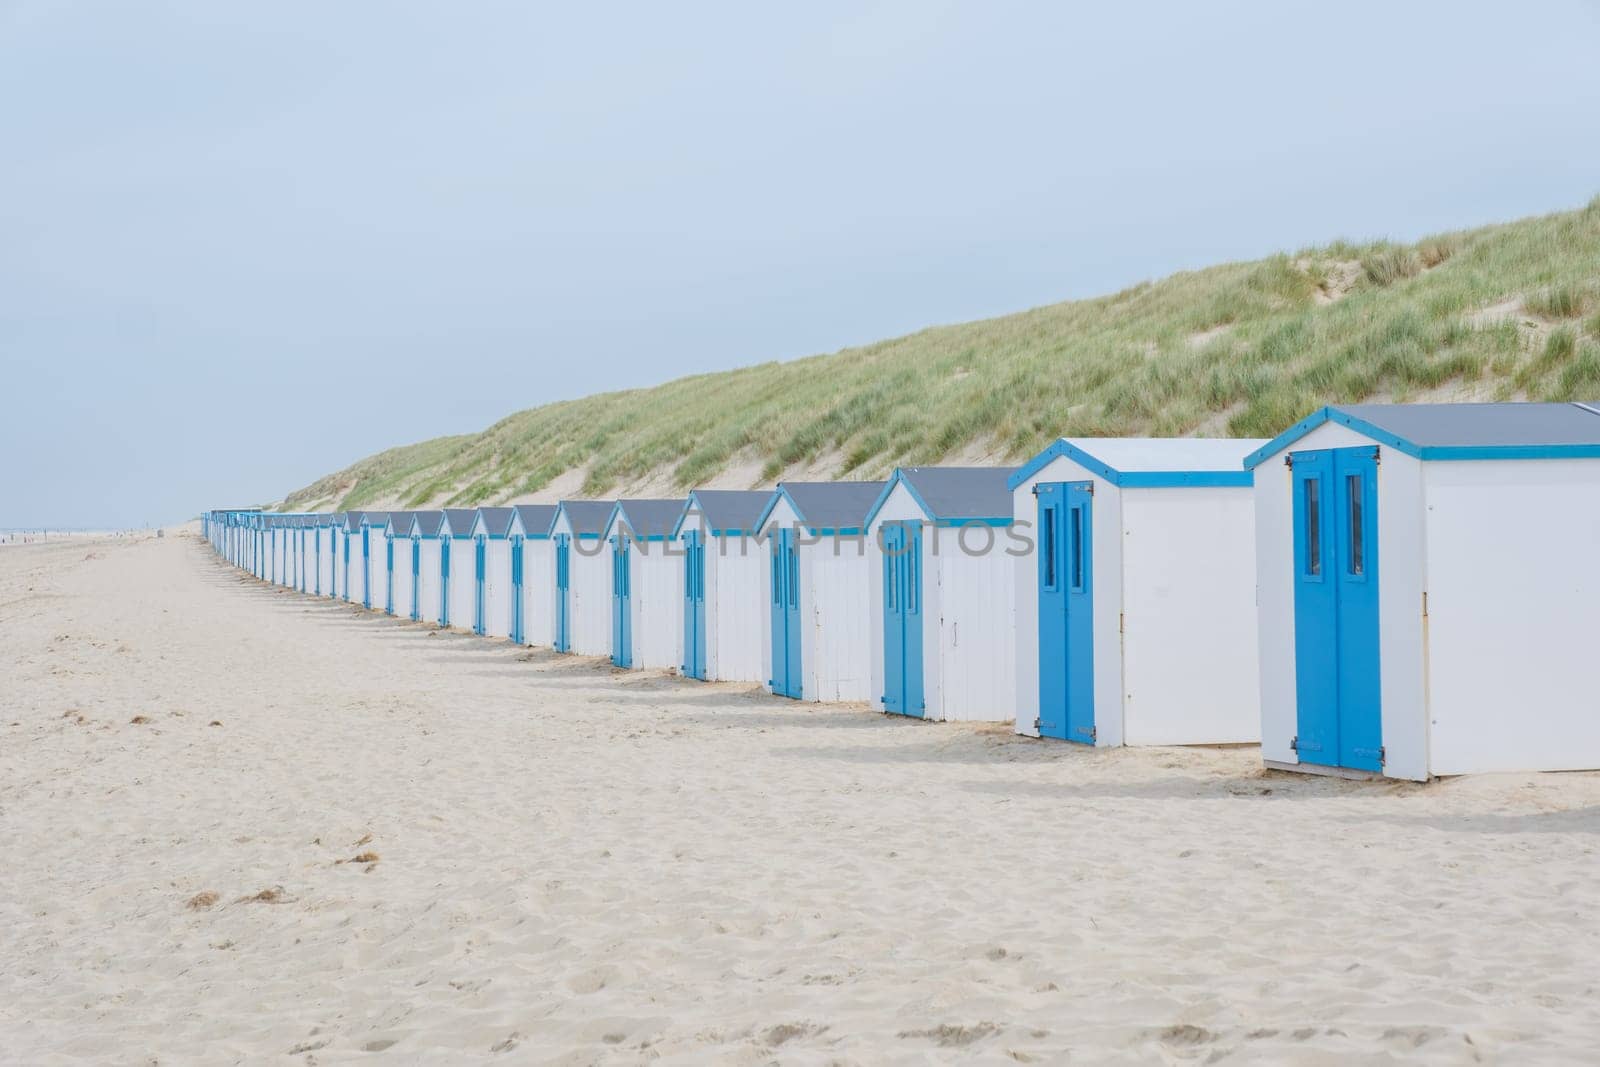 A peaceful scene unfolds as a row of charming blue beach huts stand tall against the sandy backdrop of Texel, Netherlands. De Koog beach Texel